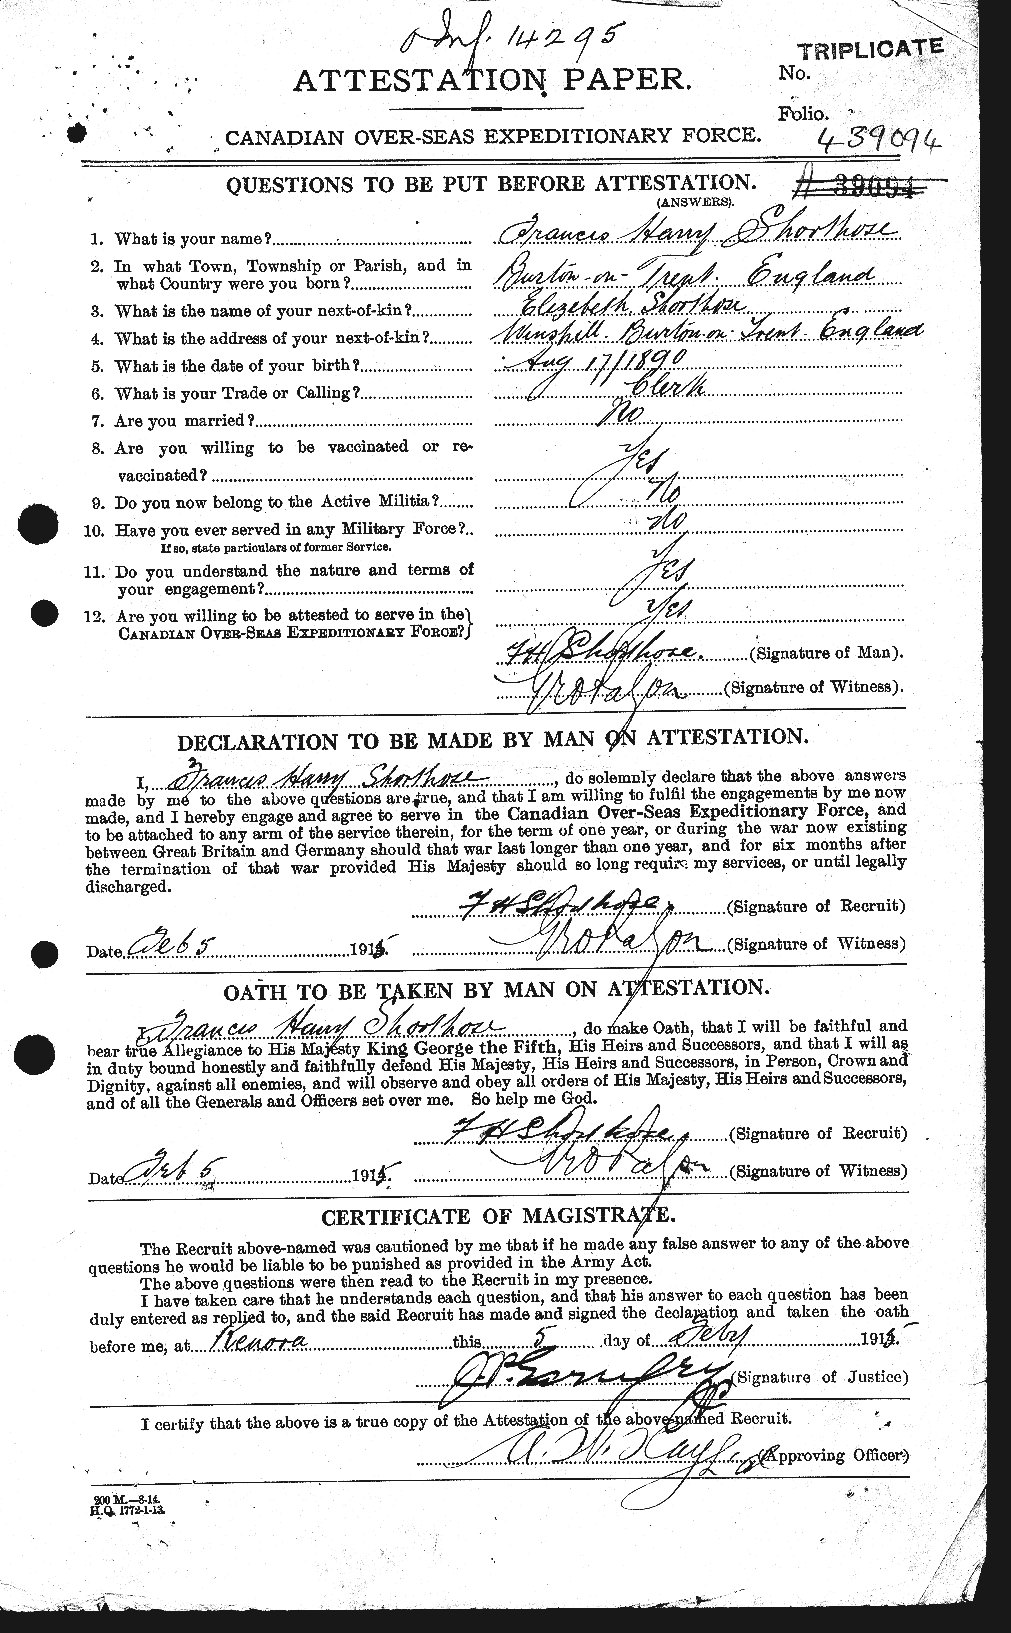 Personnel Records of the First World War - CEF 093075a